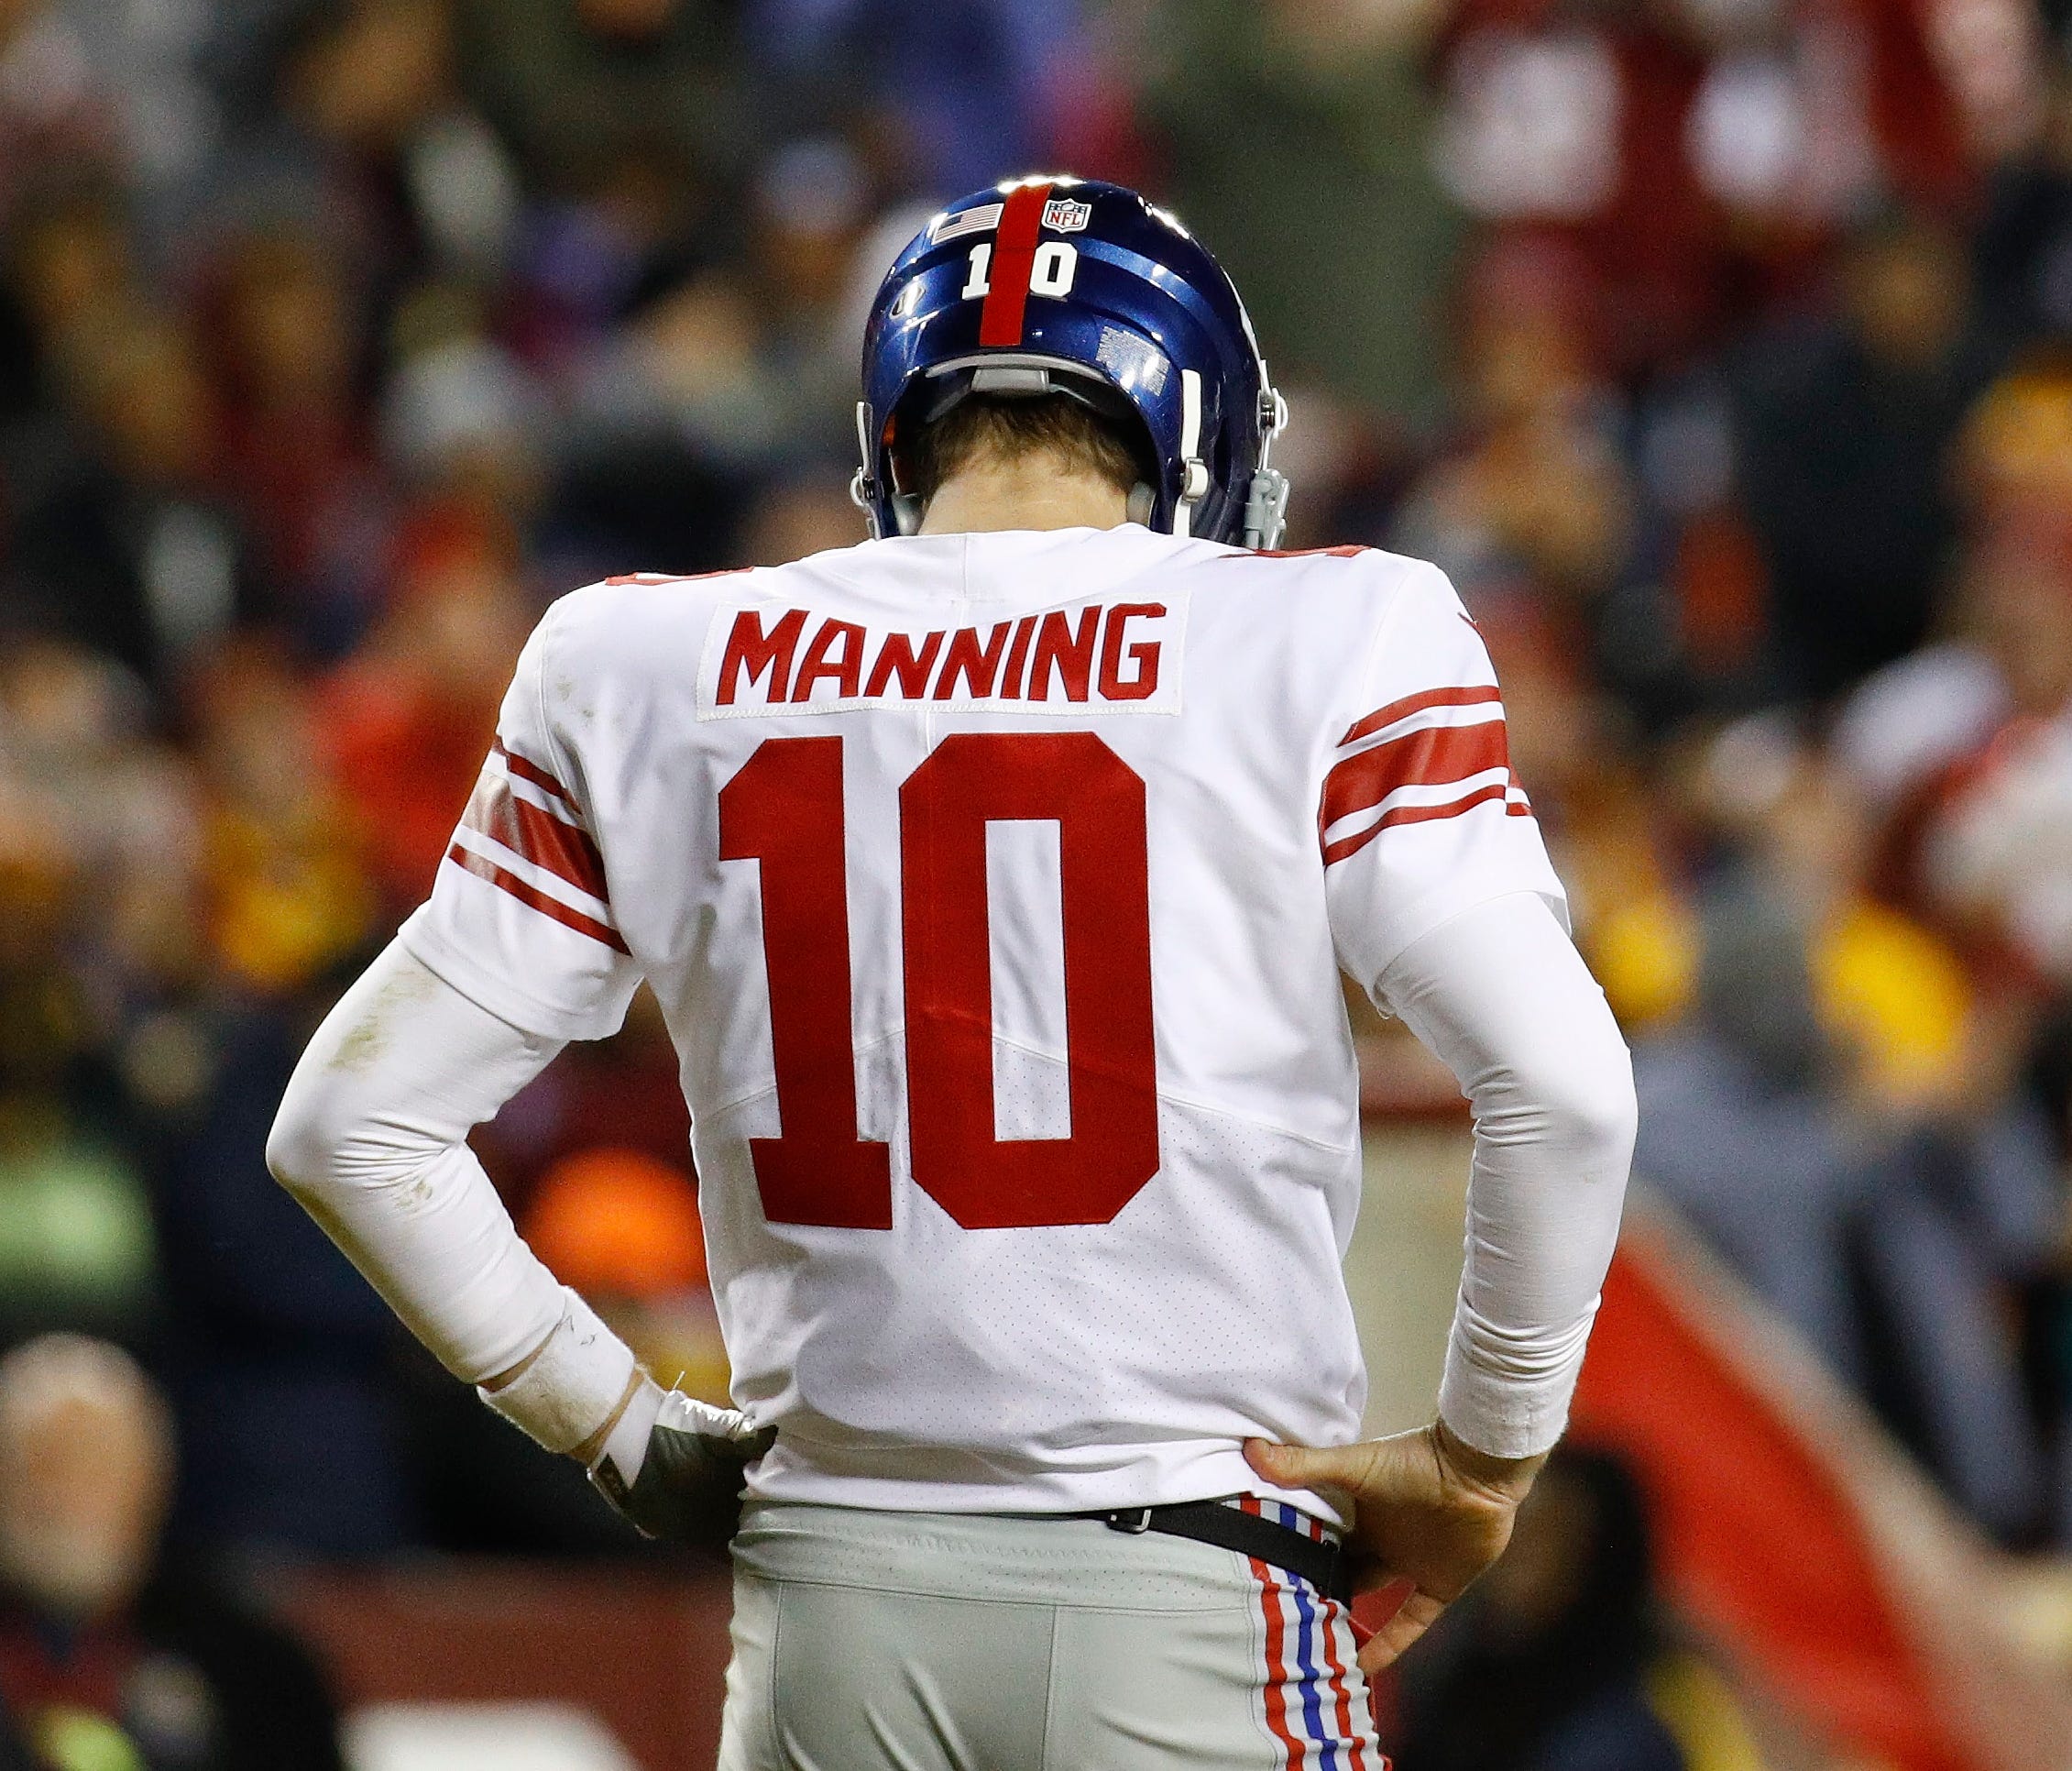 New York Giants quarterback Eli Manning (10) looks down at the turf during the second half of an NFL football game against the Washington Redskins in Landover, Md., Thursday, Nov. 23, 2017. (AP Photo/Patrick Semansky)